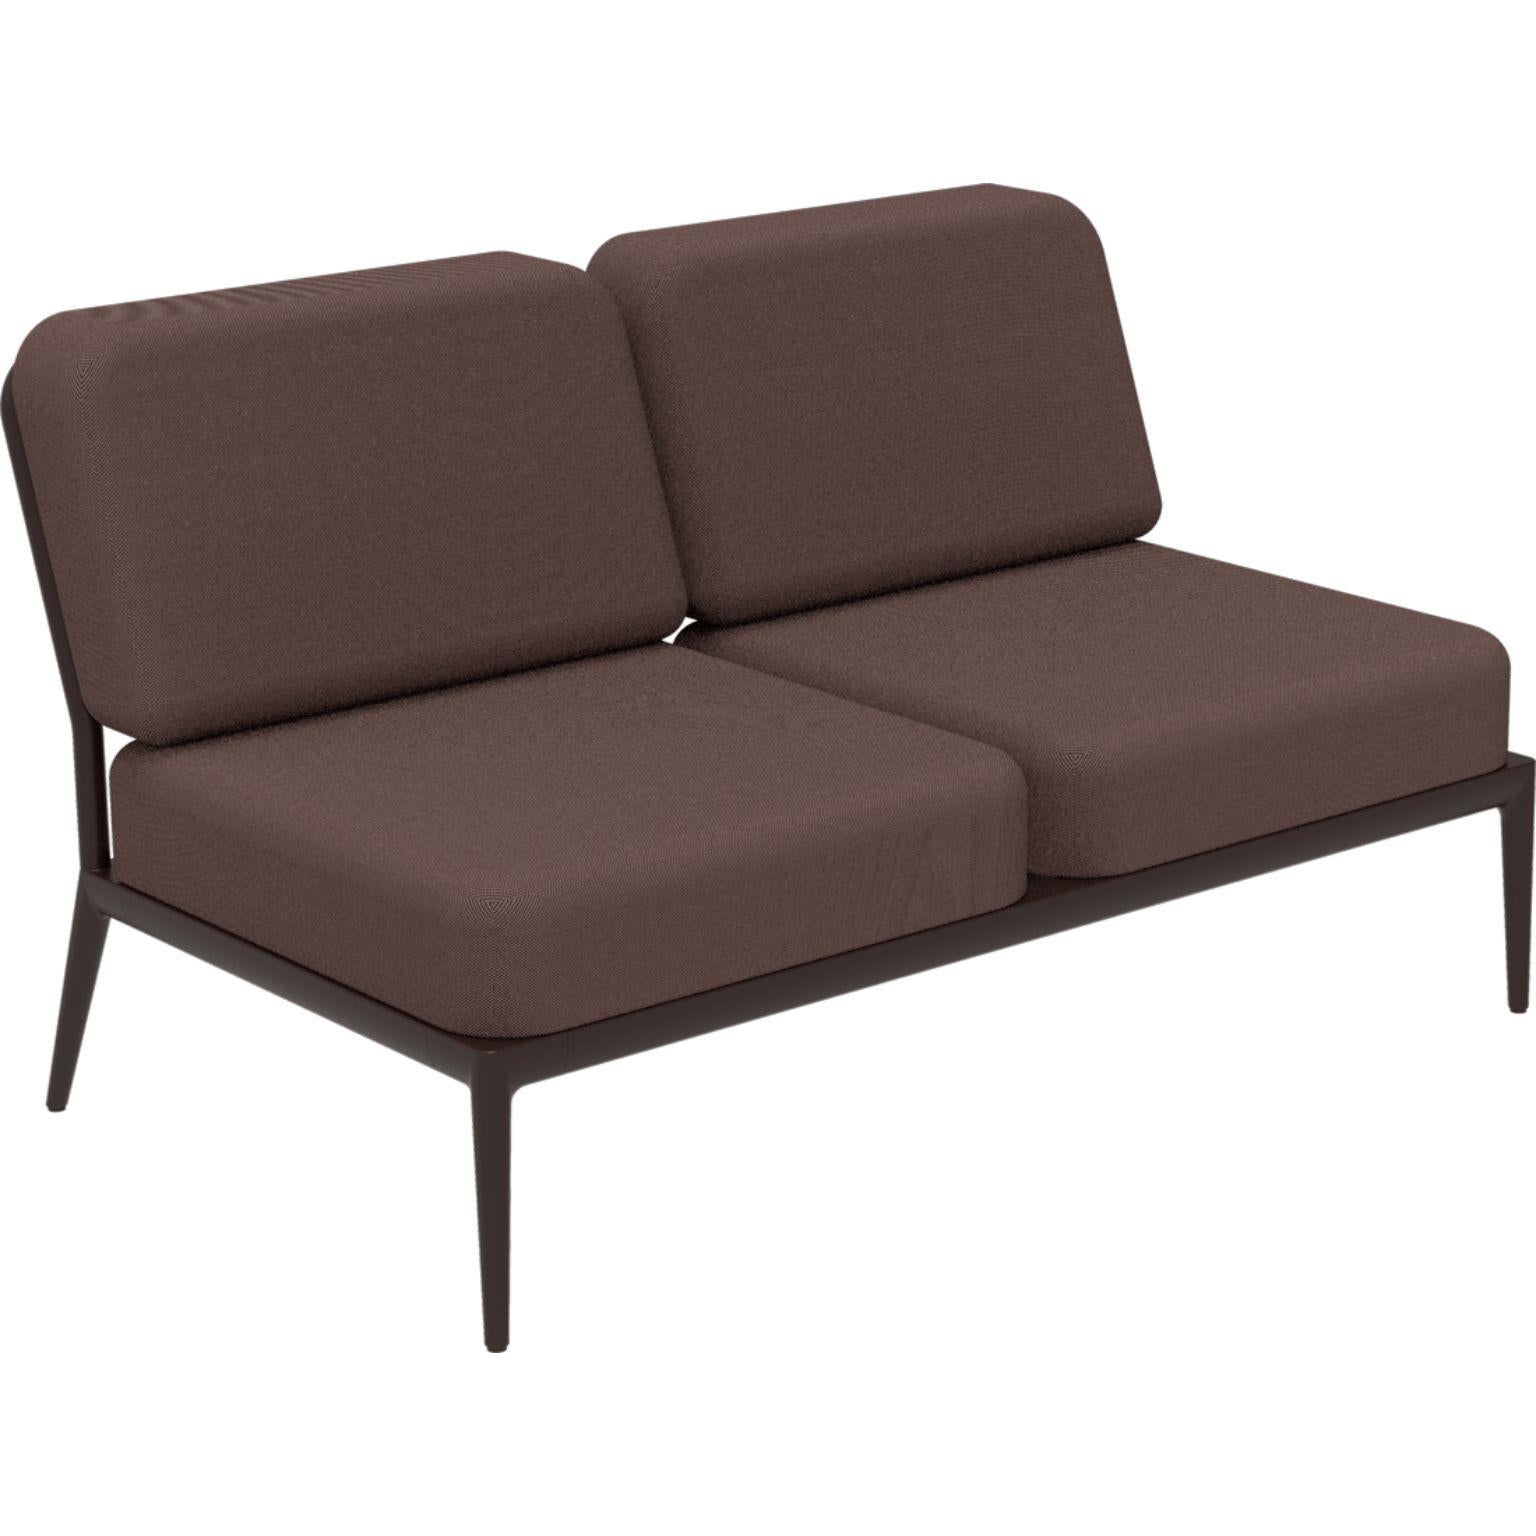 Nature chocolate double central modular sofa by MOWEE
Dimensions: D83 x W136 x H81 cm (seat height 42 cm).
Material: Aluminum and upholstery.
Weight: 27 kg.
Also available in different colors and finishes.

An unmistakable collection for its